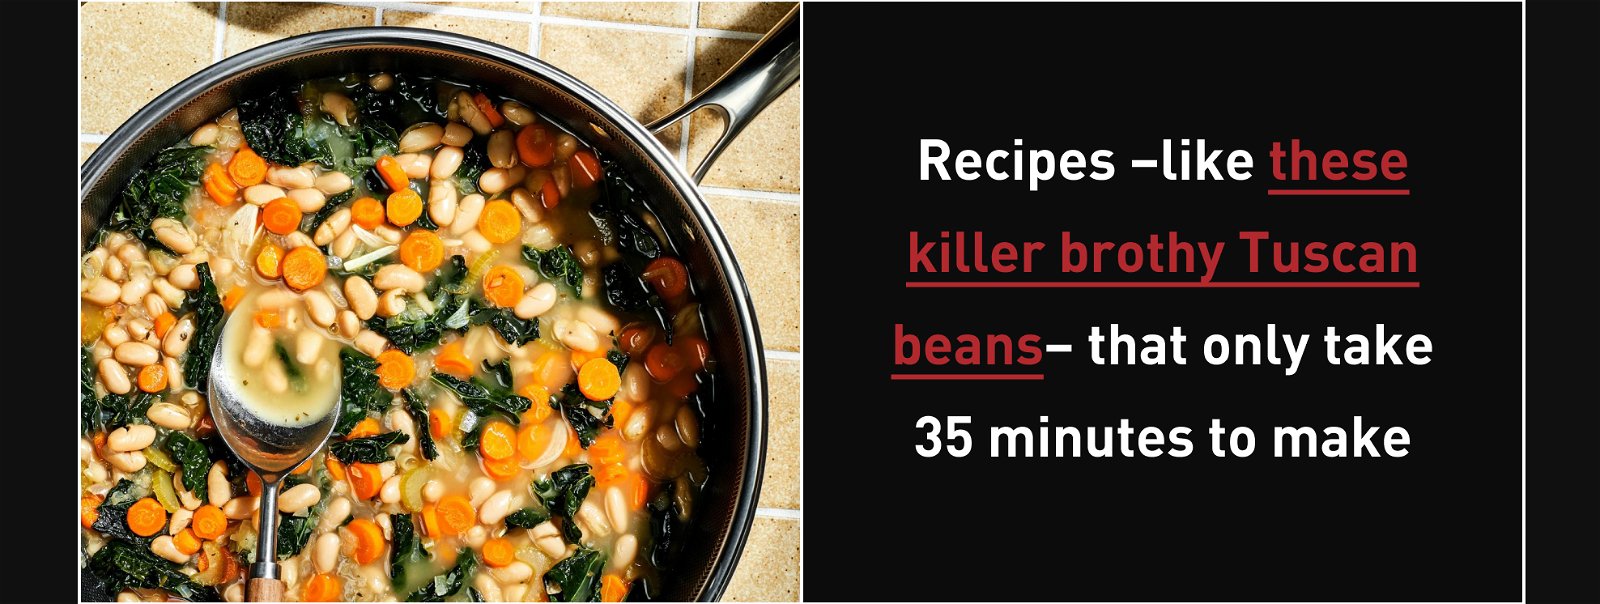 Recipes -like these killer brothy Tuscan beans- that only take 35 minutes to make